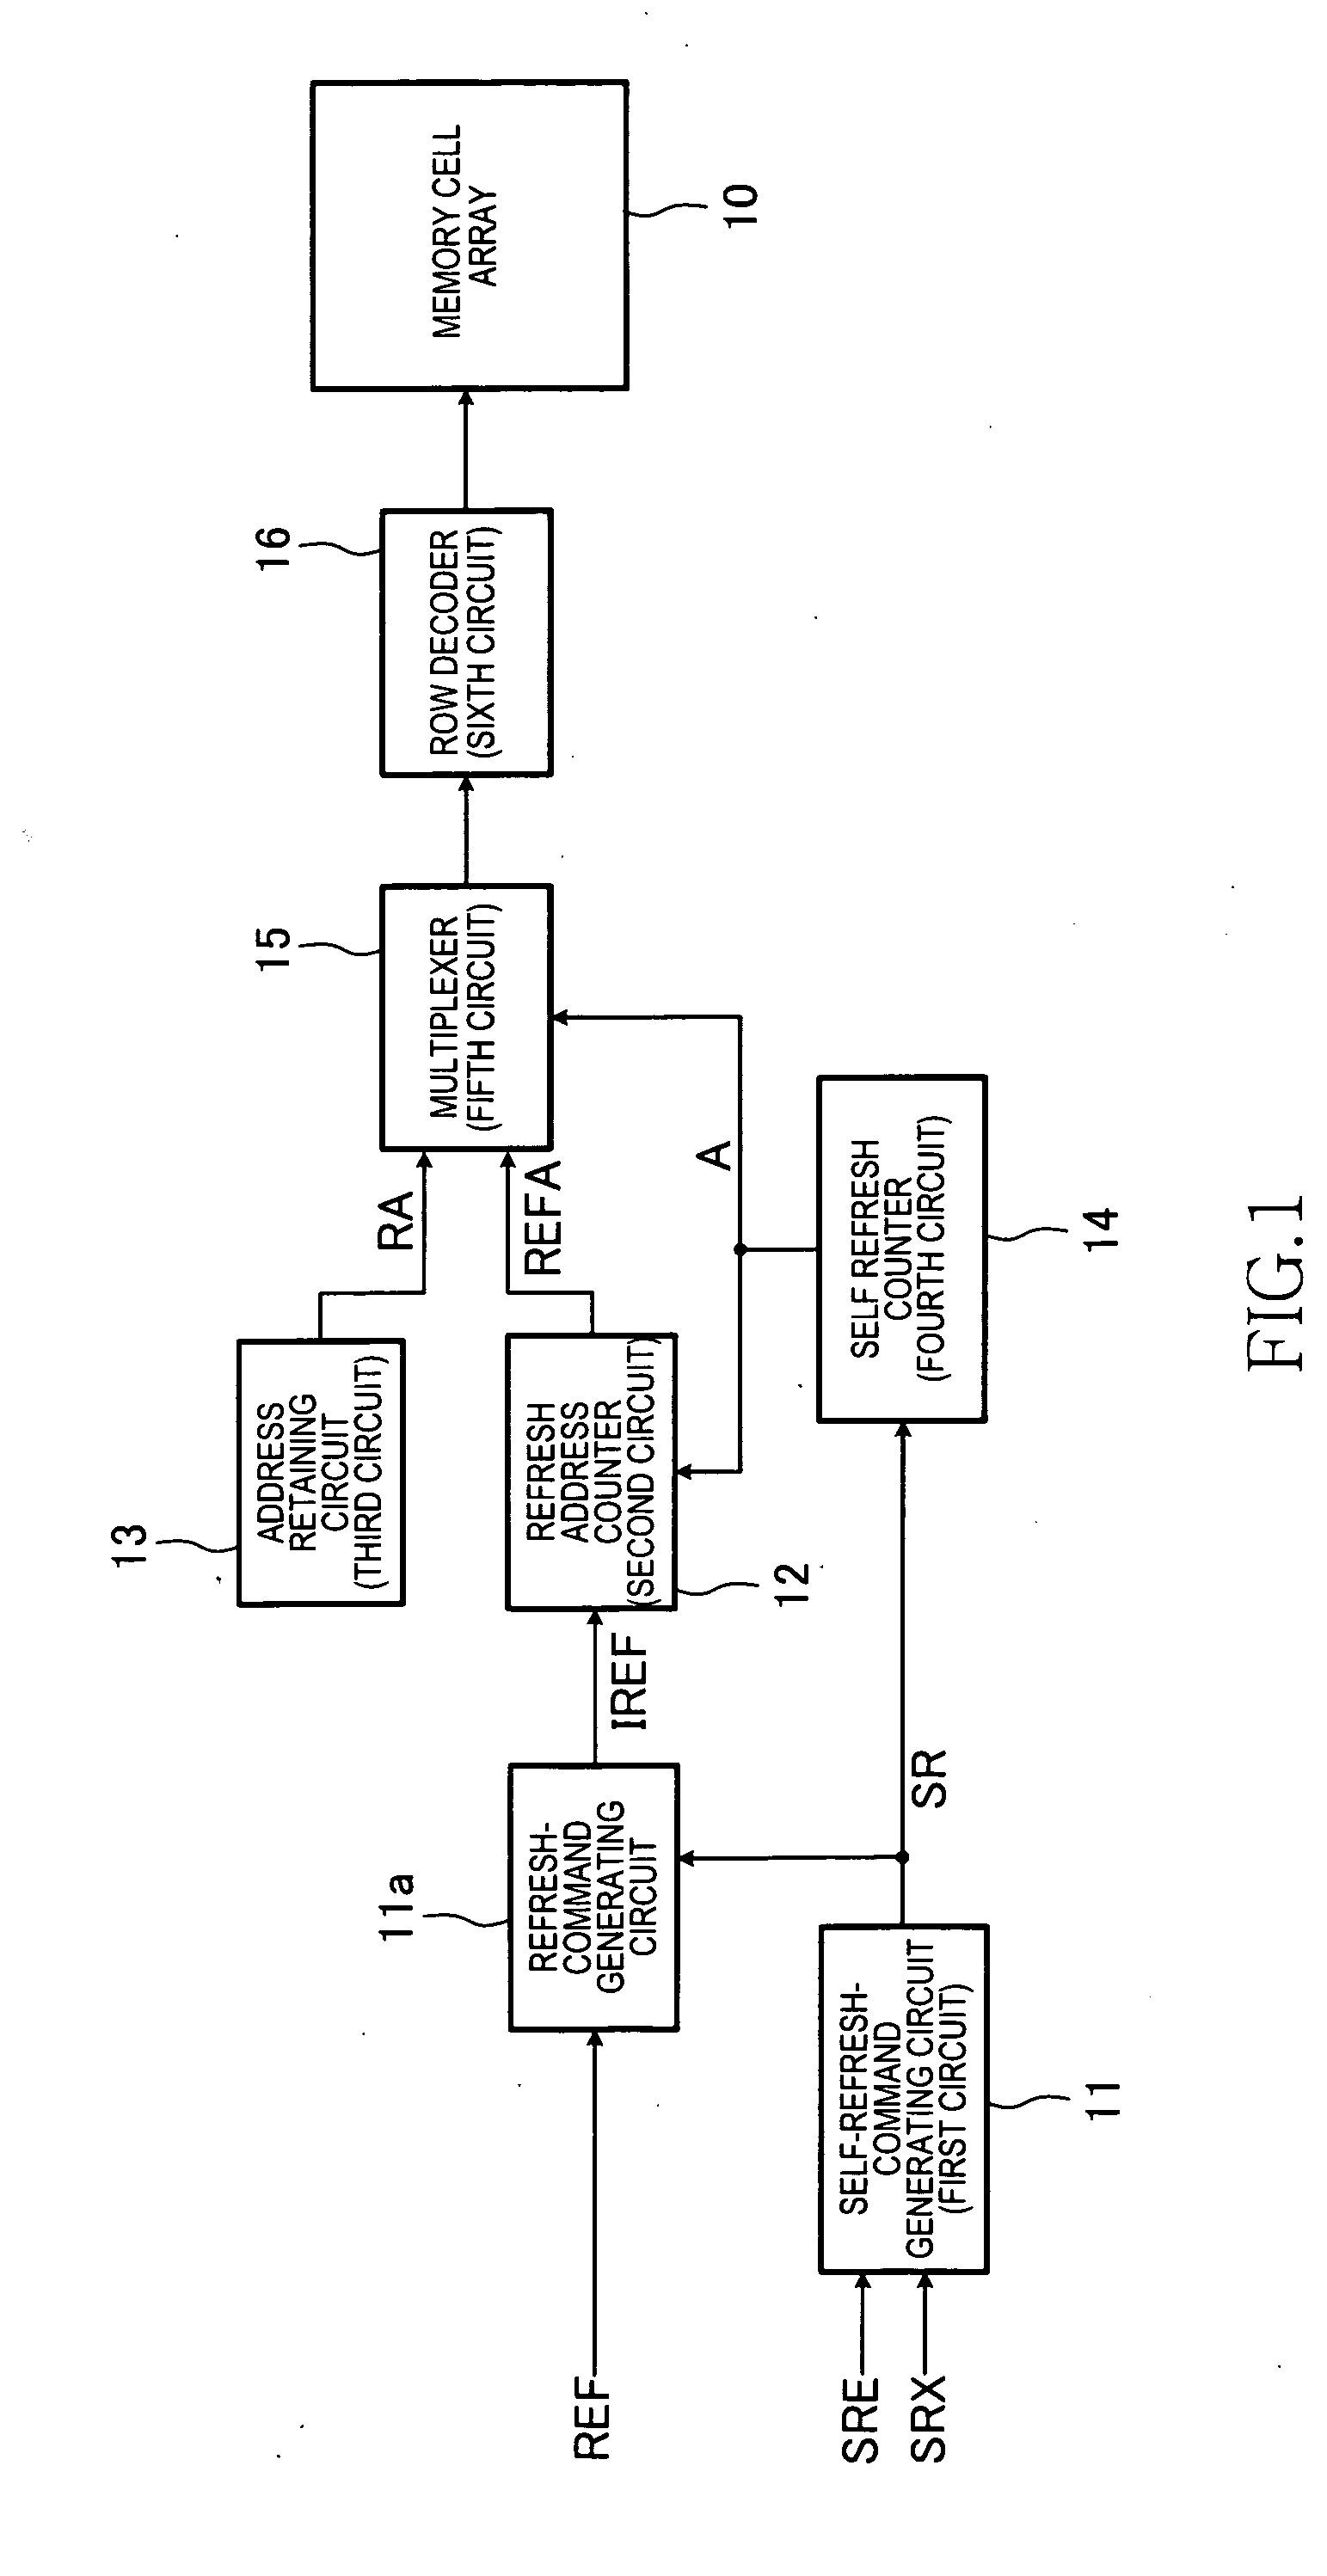 Semiconductor device including memory cells that require refresh operation